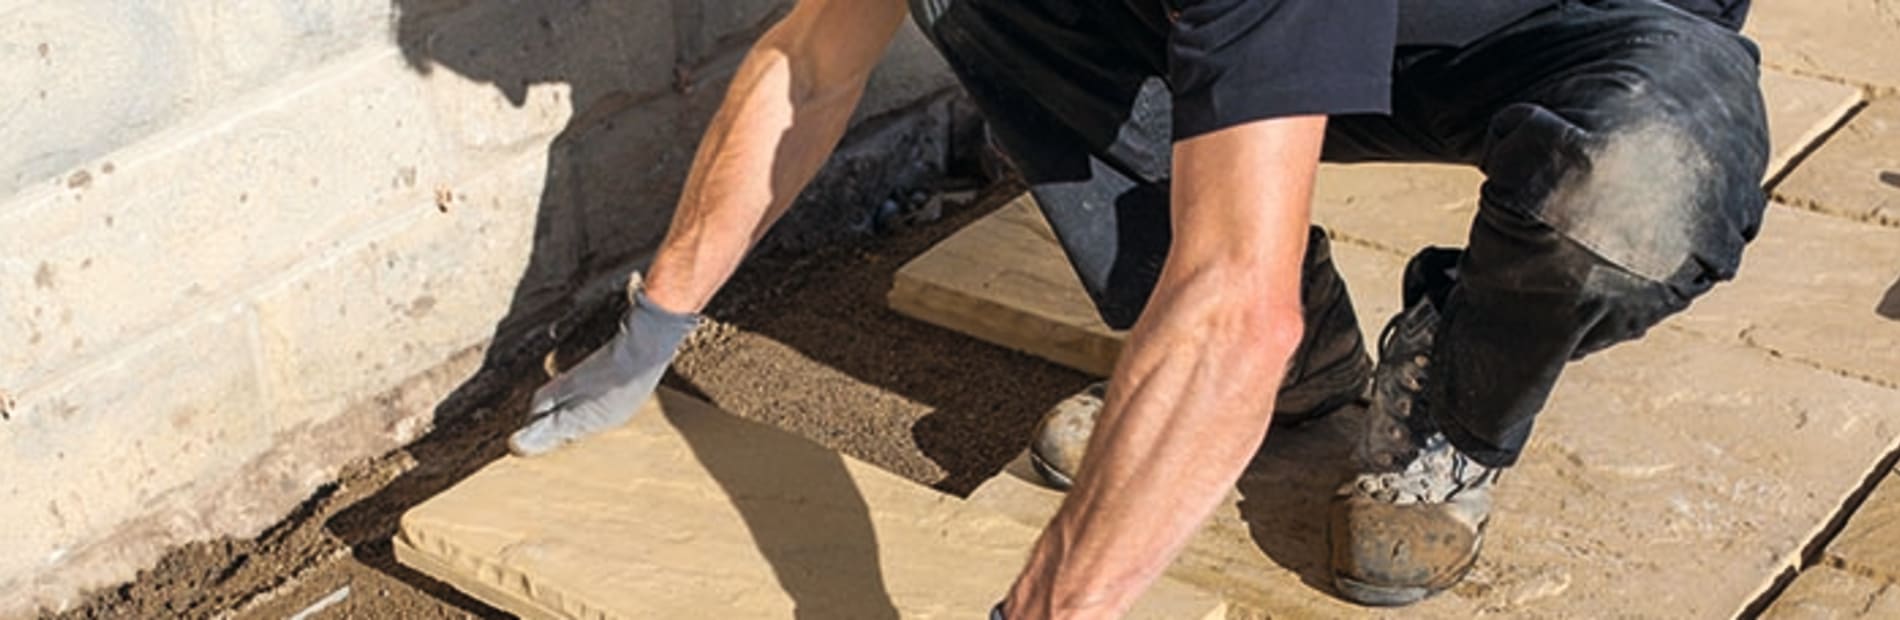 installer laying paving in a patio area